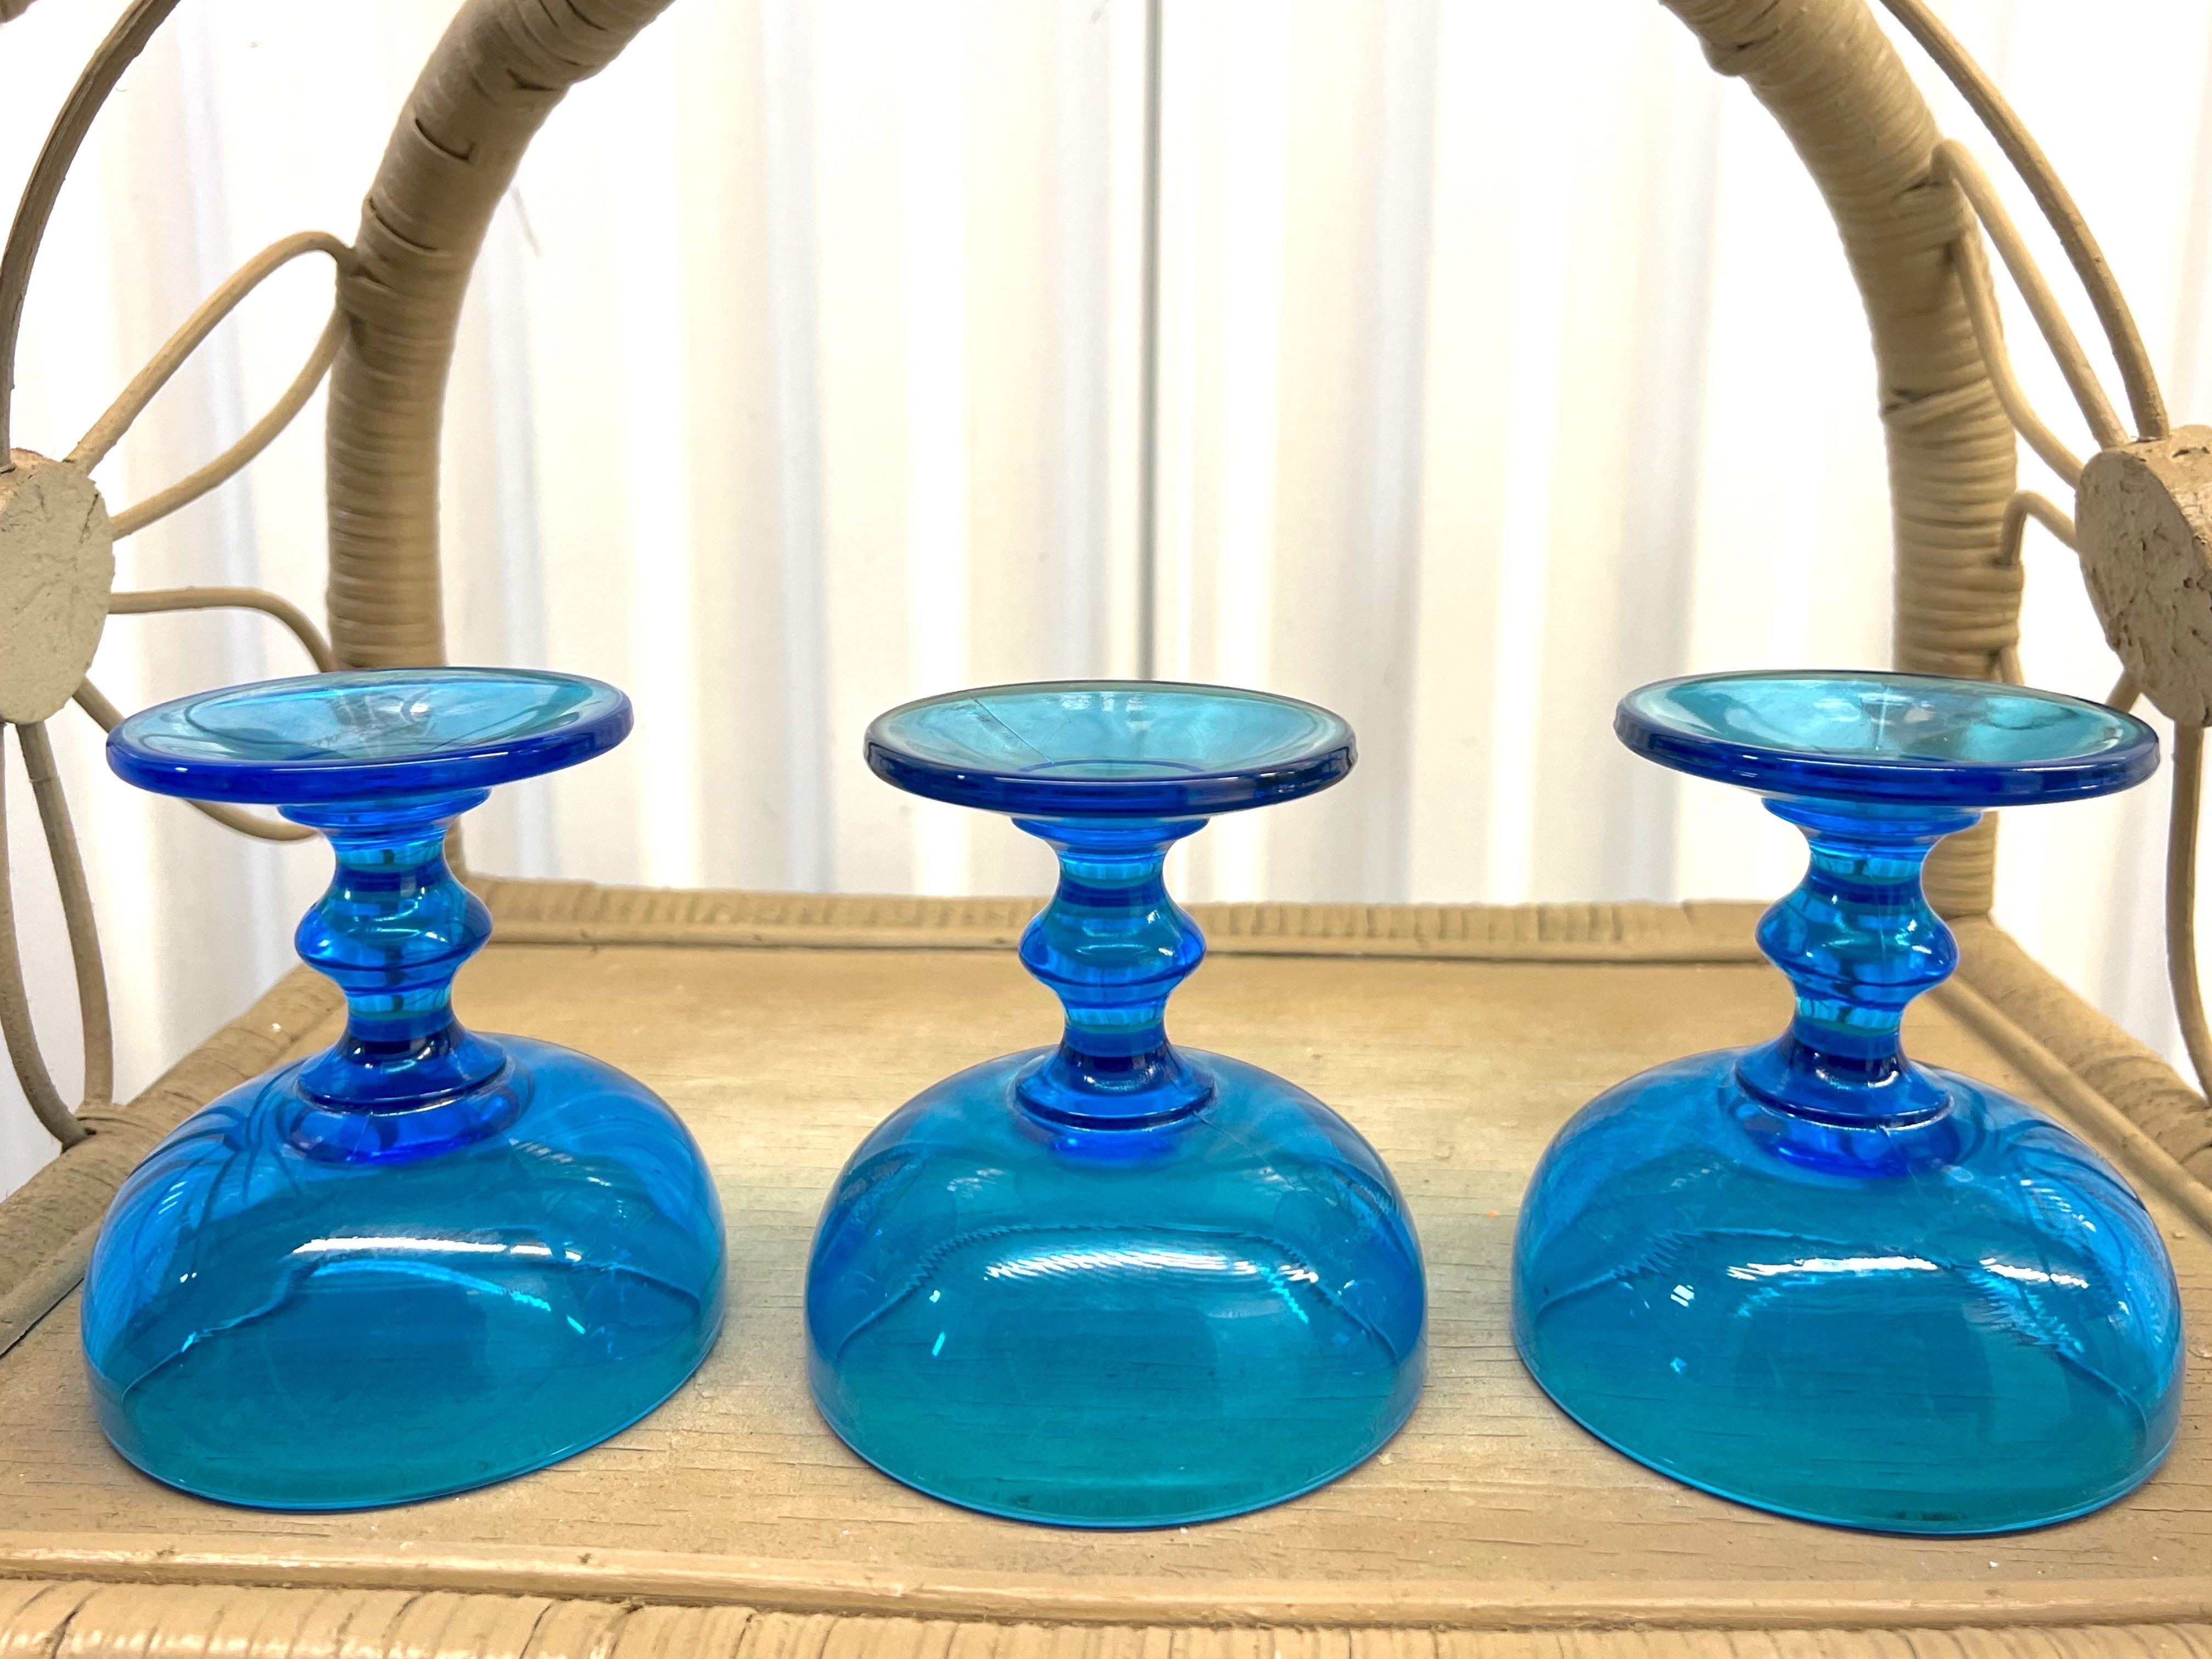 Early 20th Century Cobalt Blue Champagne/ Dessert Glasses - Set of 6 For Sale 1